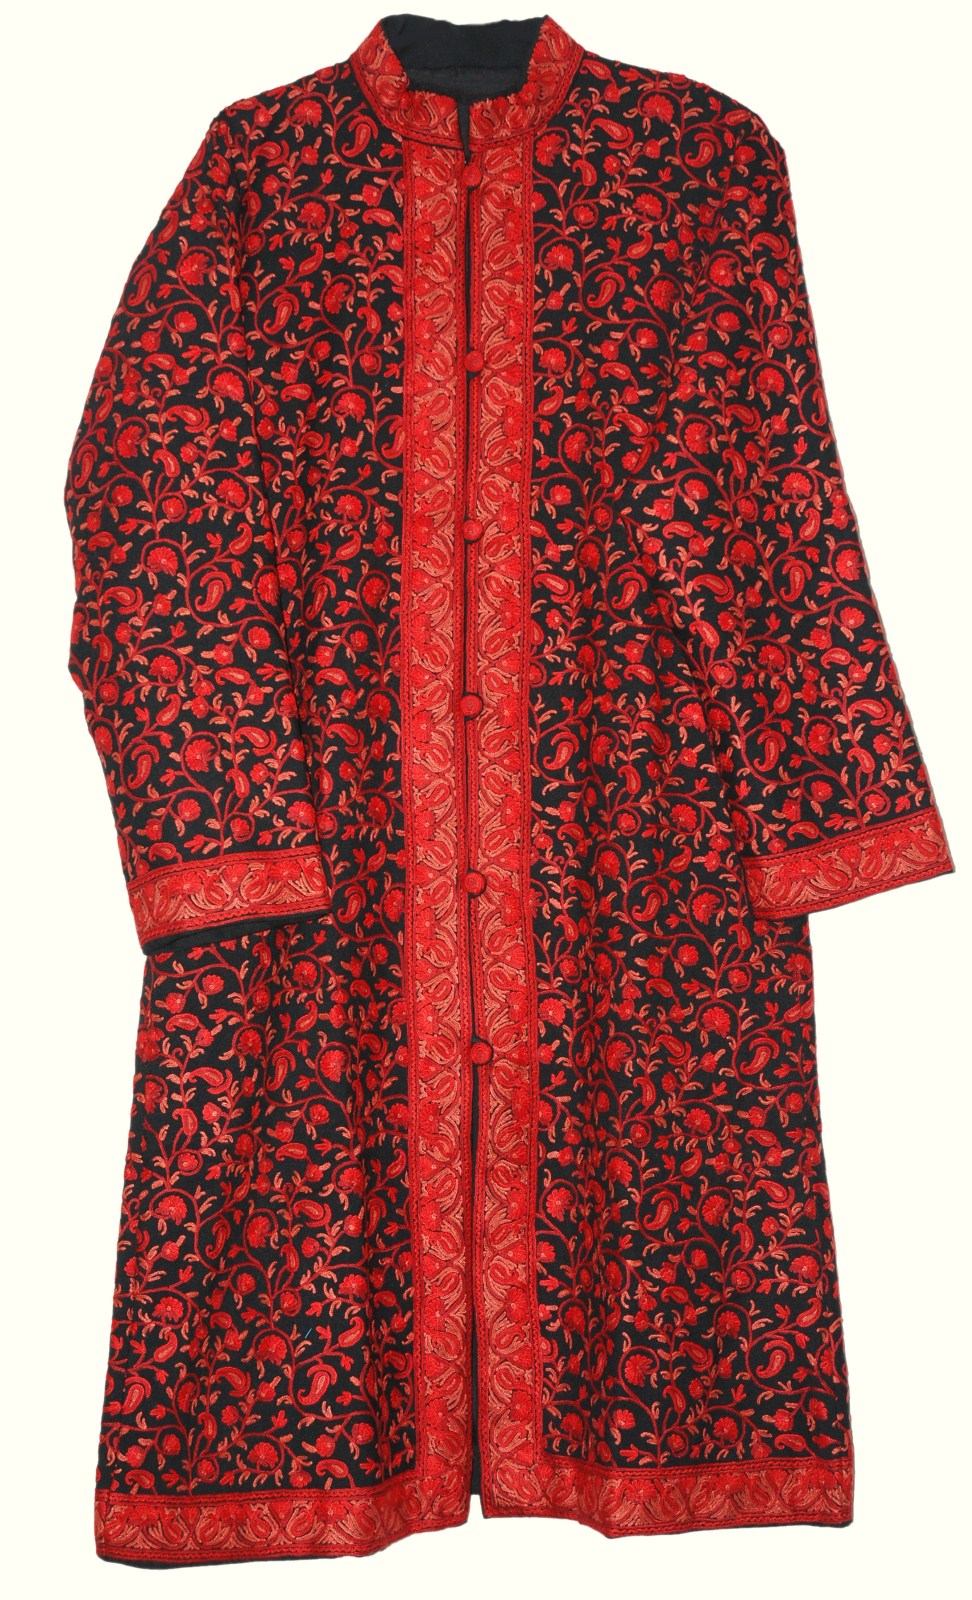 Woolen Coat Long Jacket Black, Red Embroidery #AO-153